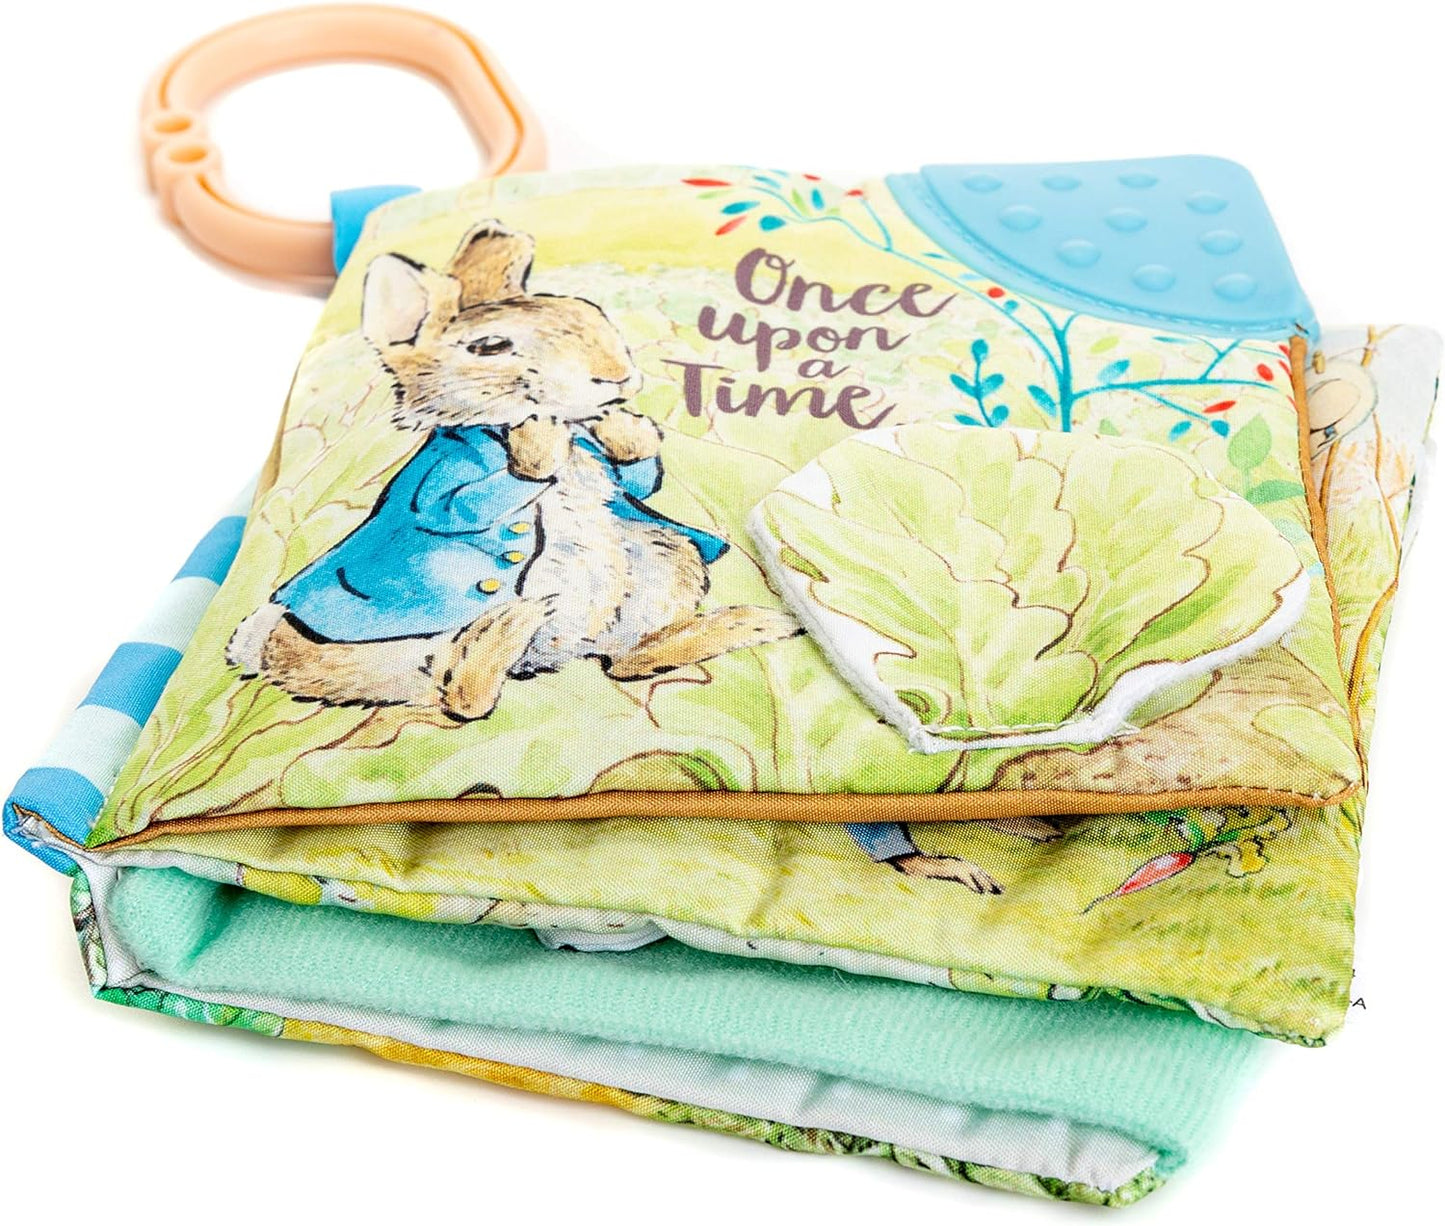 KIDS PREFERRED Peter Rabbit Soft Book with toy, Teether and Crinkle, 5 Inches